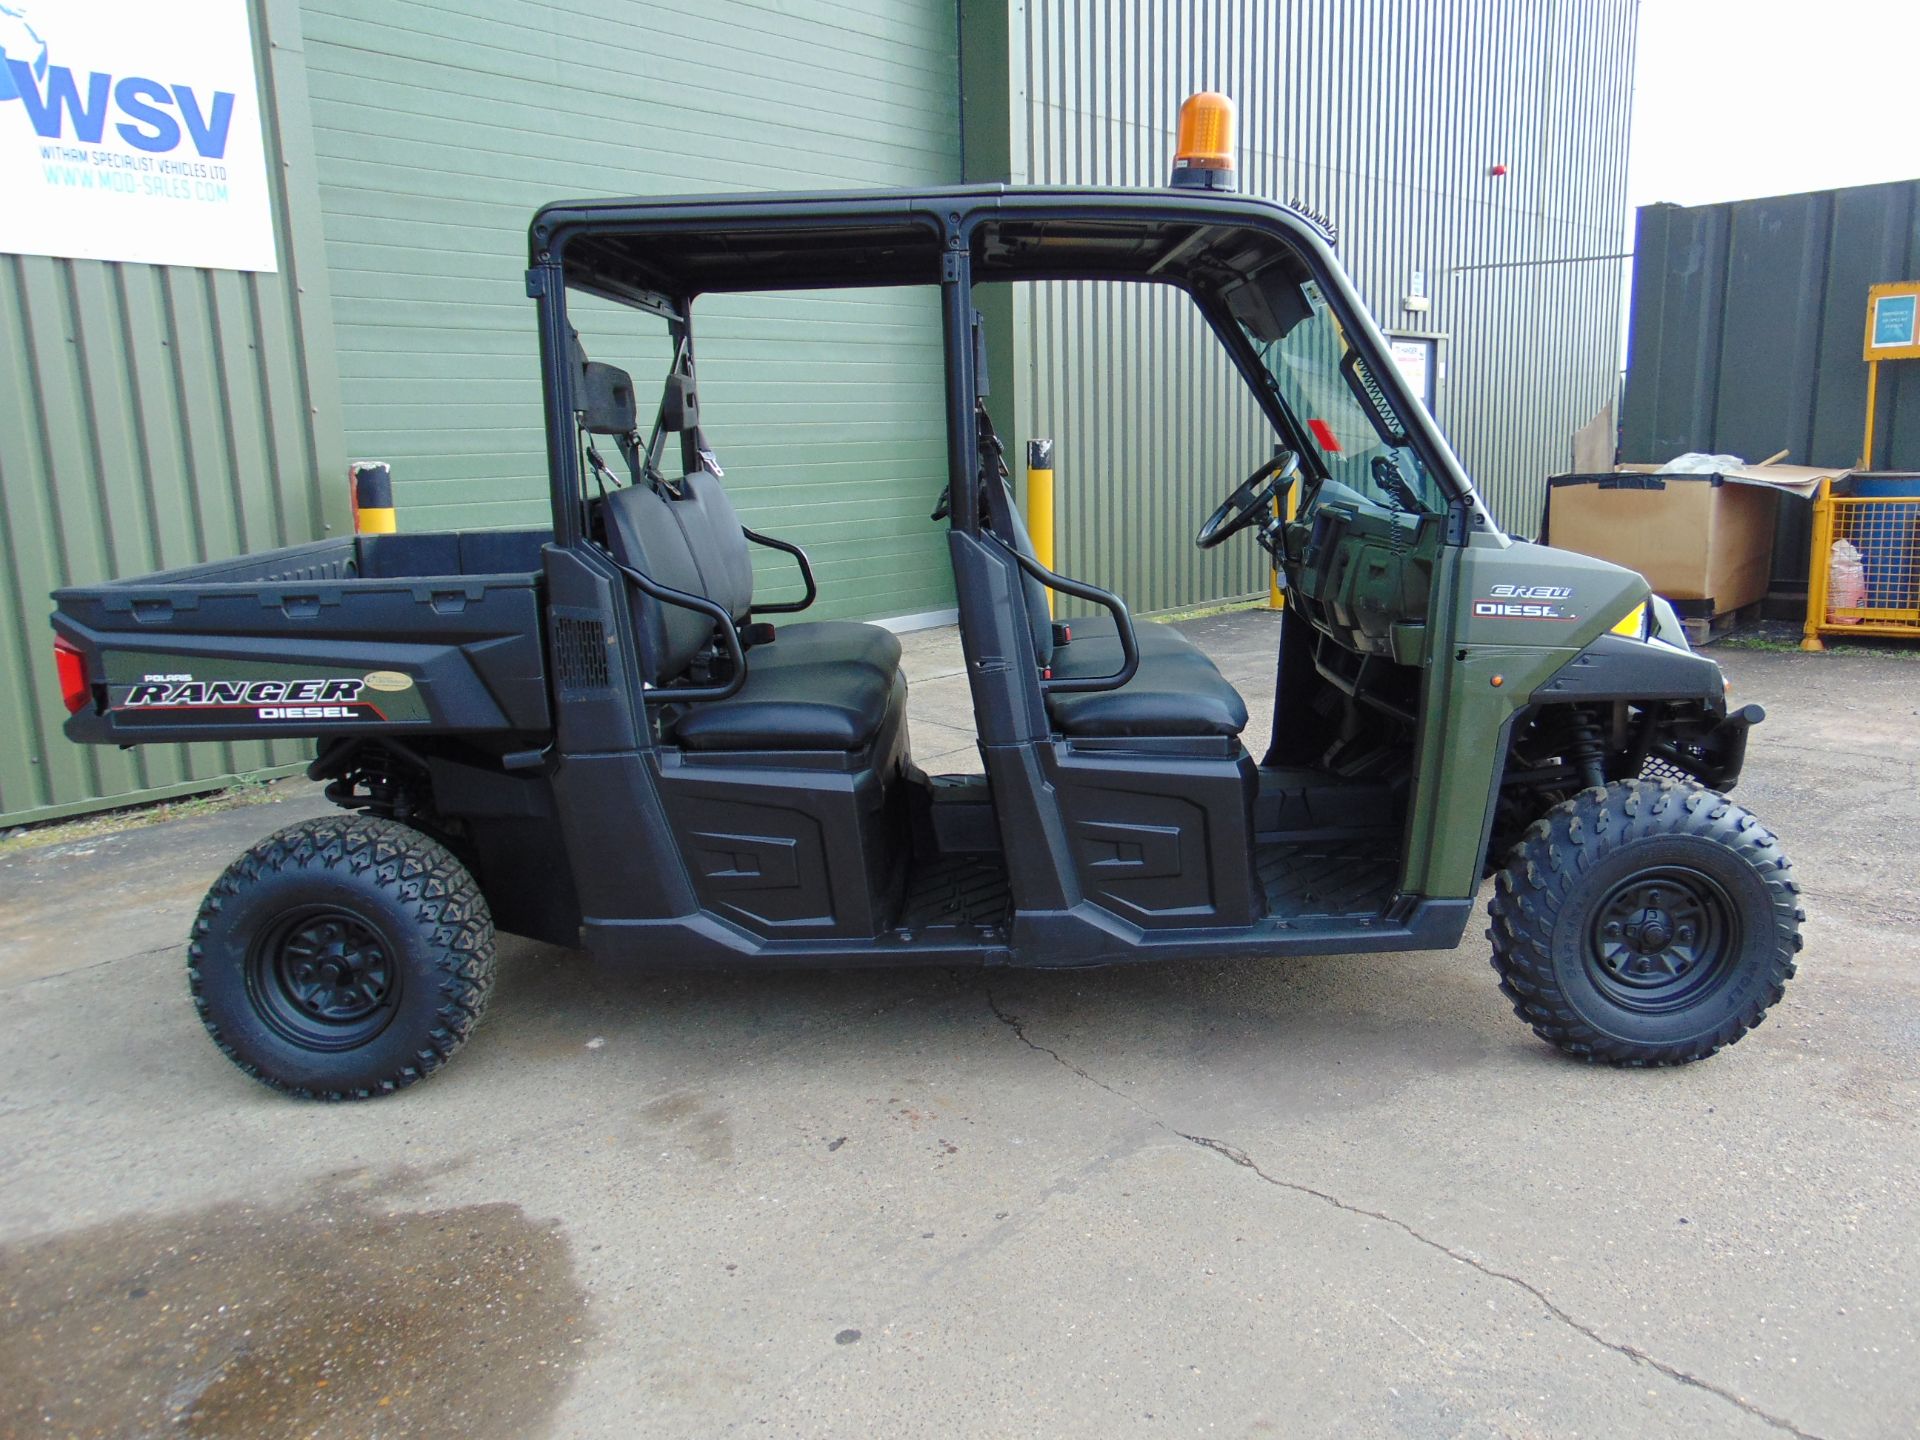 Polaris Ranger Crew Cab Diesel Utility Vehicle 1,190 Hrs only from Govt Dept - Image 6 of 25